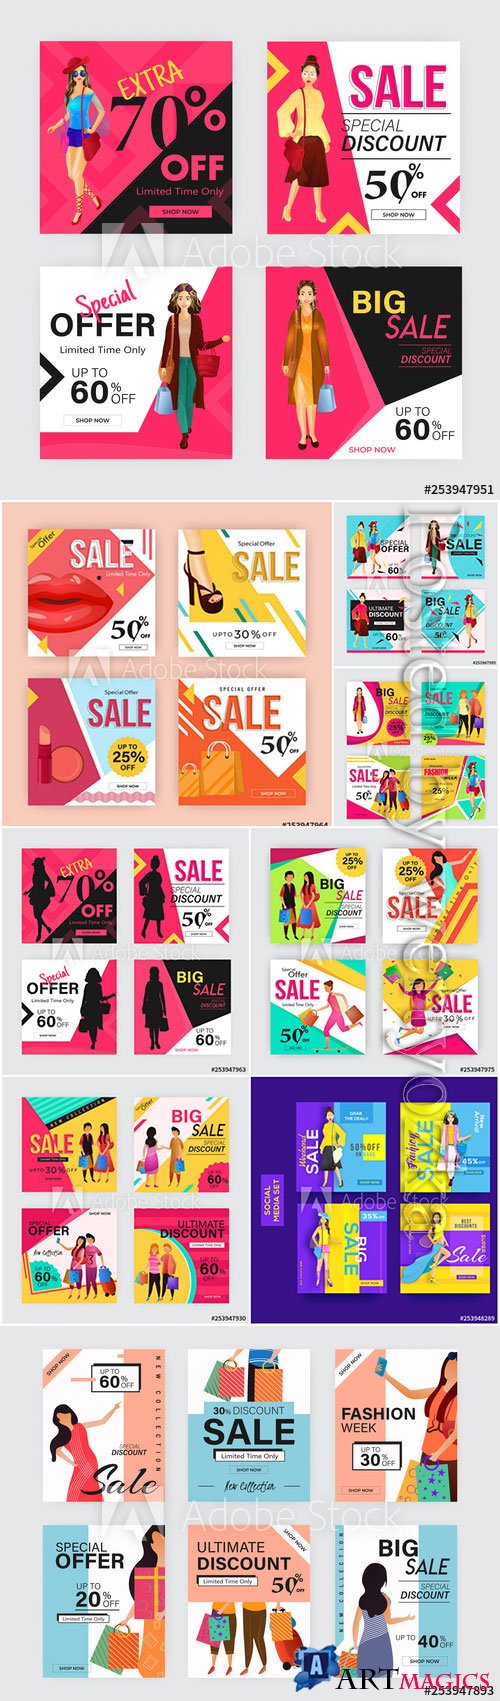 Sale template or poster design with different discount offers and 